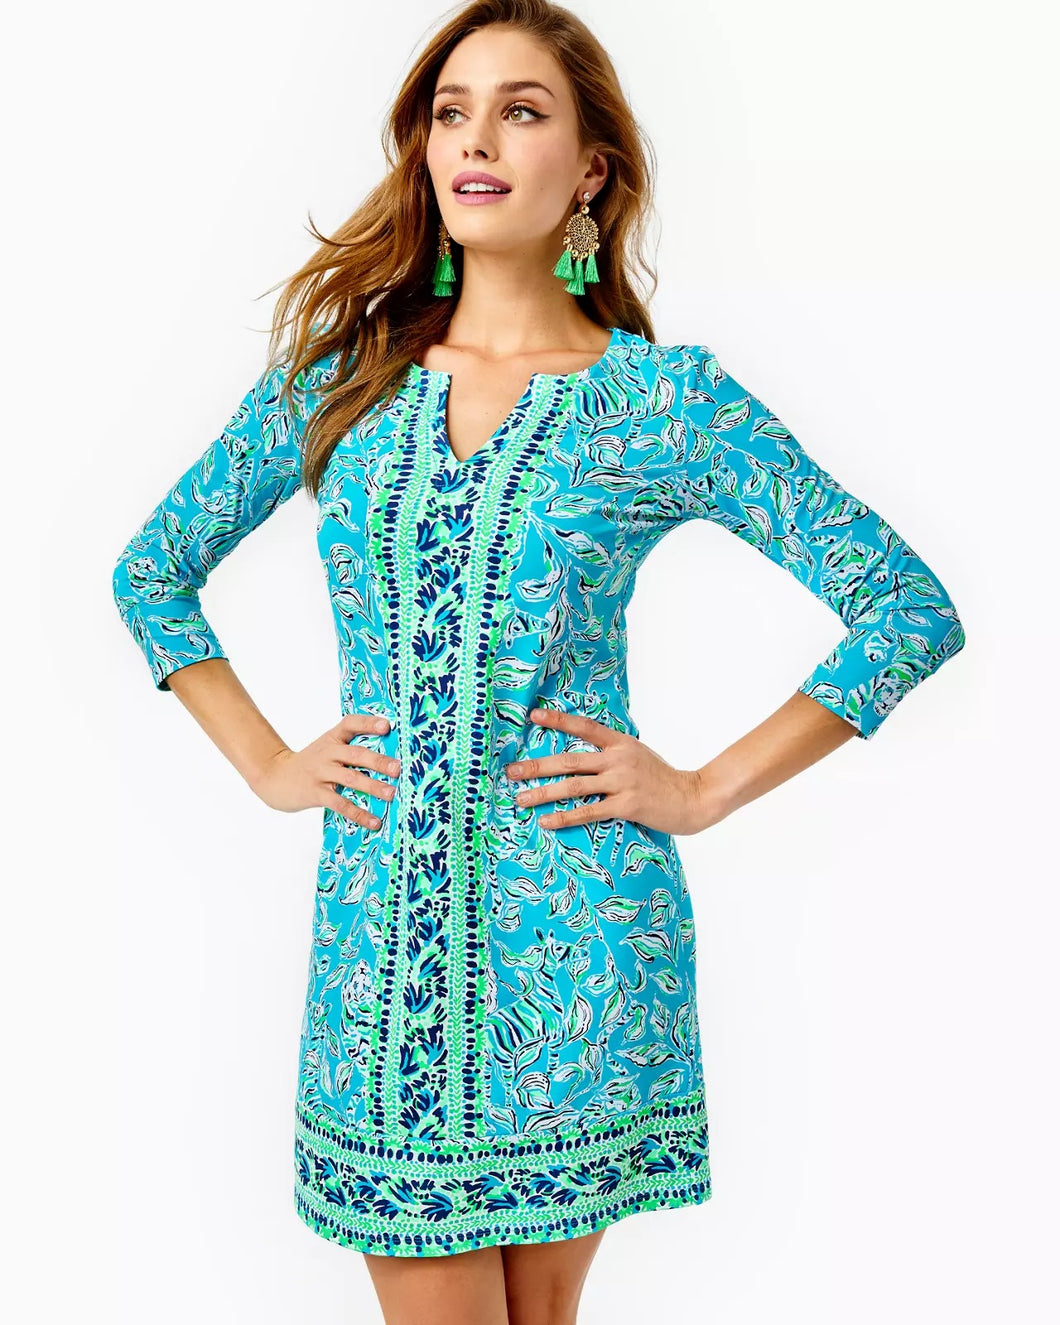 UPF 50+ Chilly Lilly Nadine Dress Turquoise Oasis